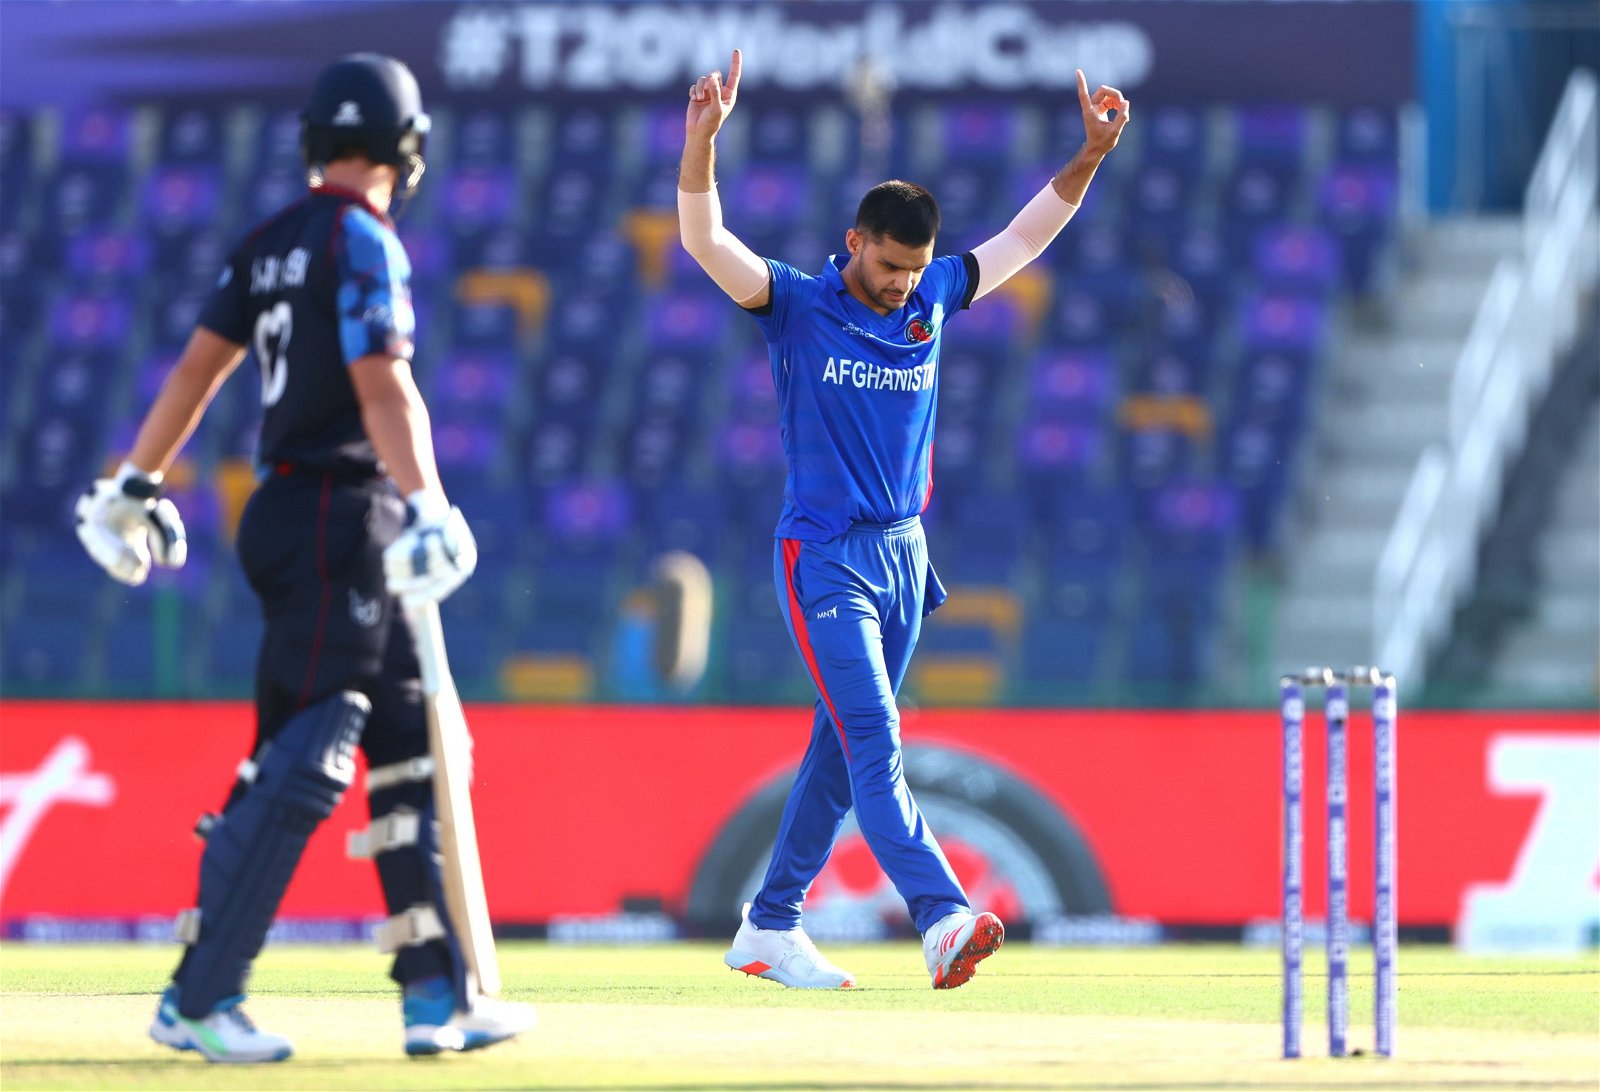 Naveen-ul-Haq took two Namibian wickets in the Power Play